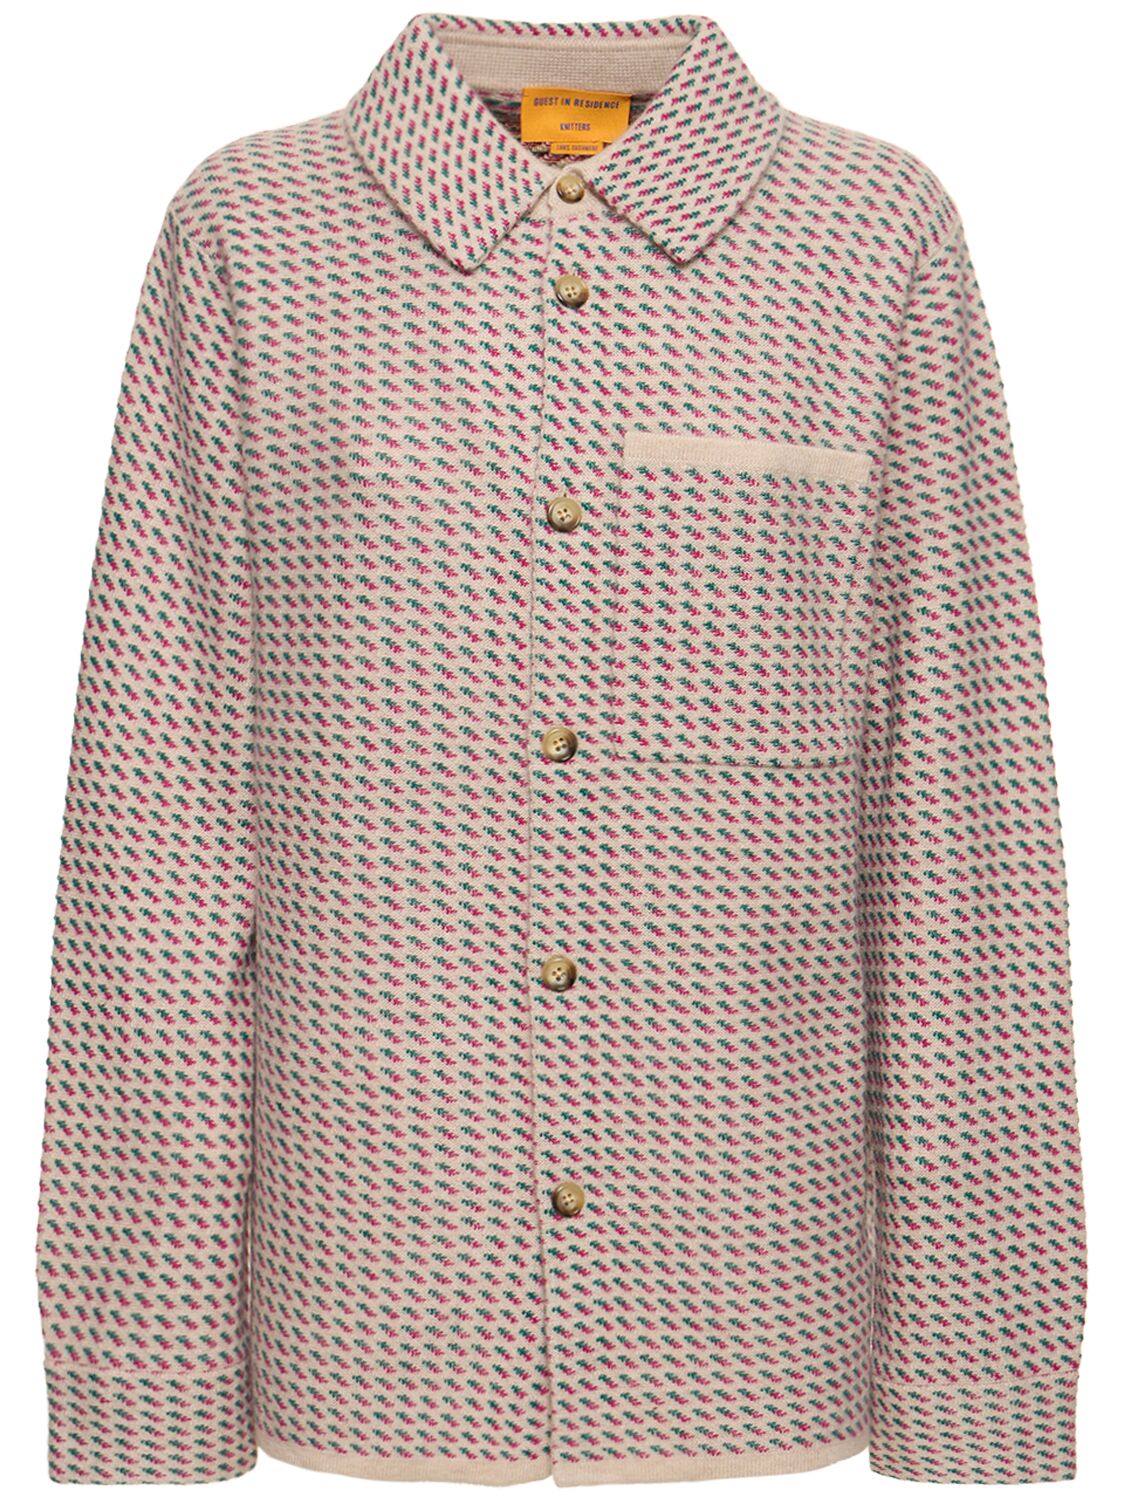 Guest In Residence The Tweed Work Cashmere Shirt In Multicolor